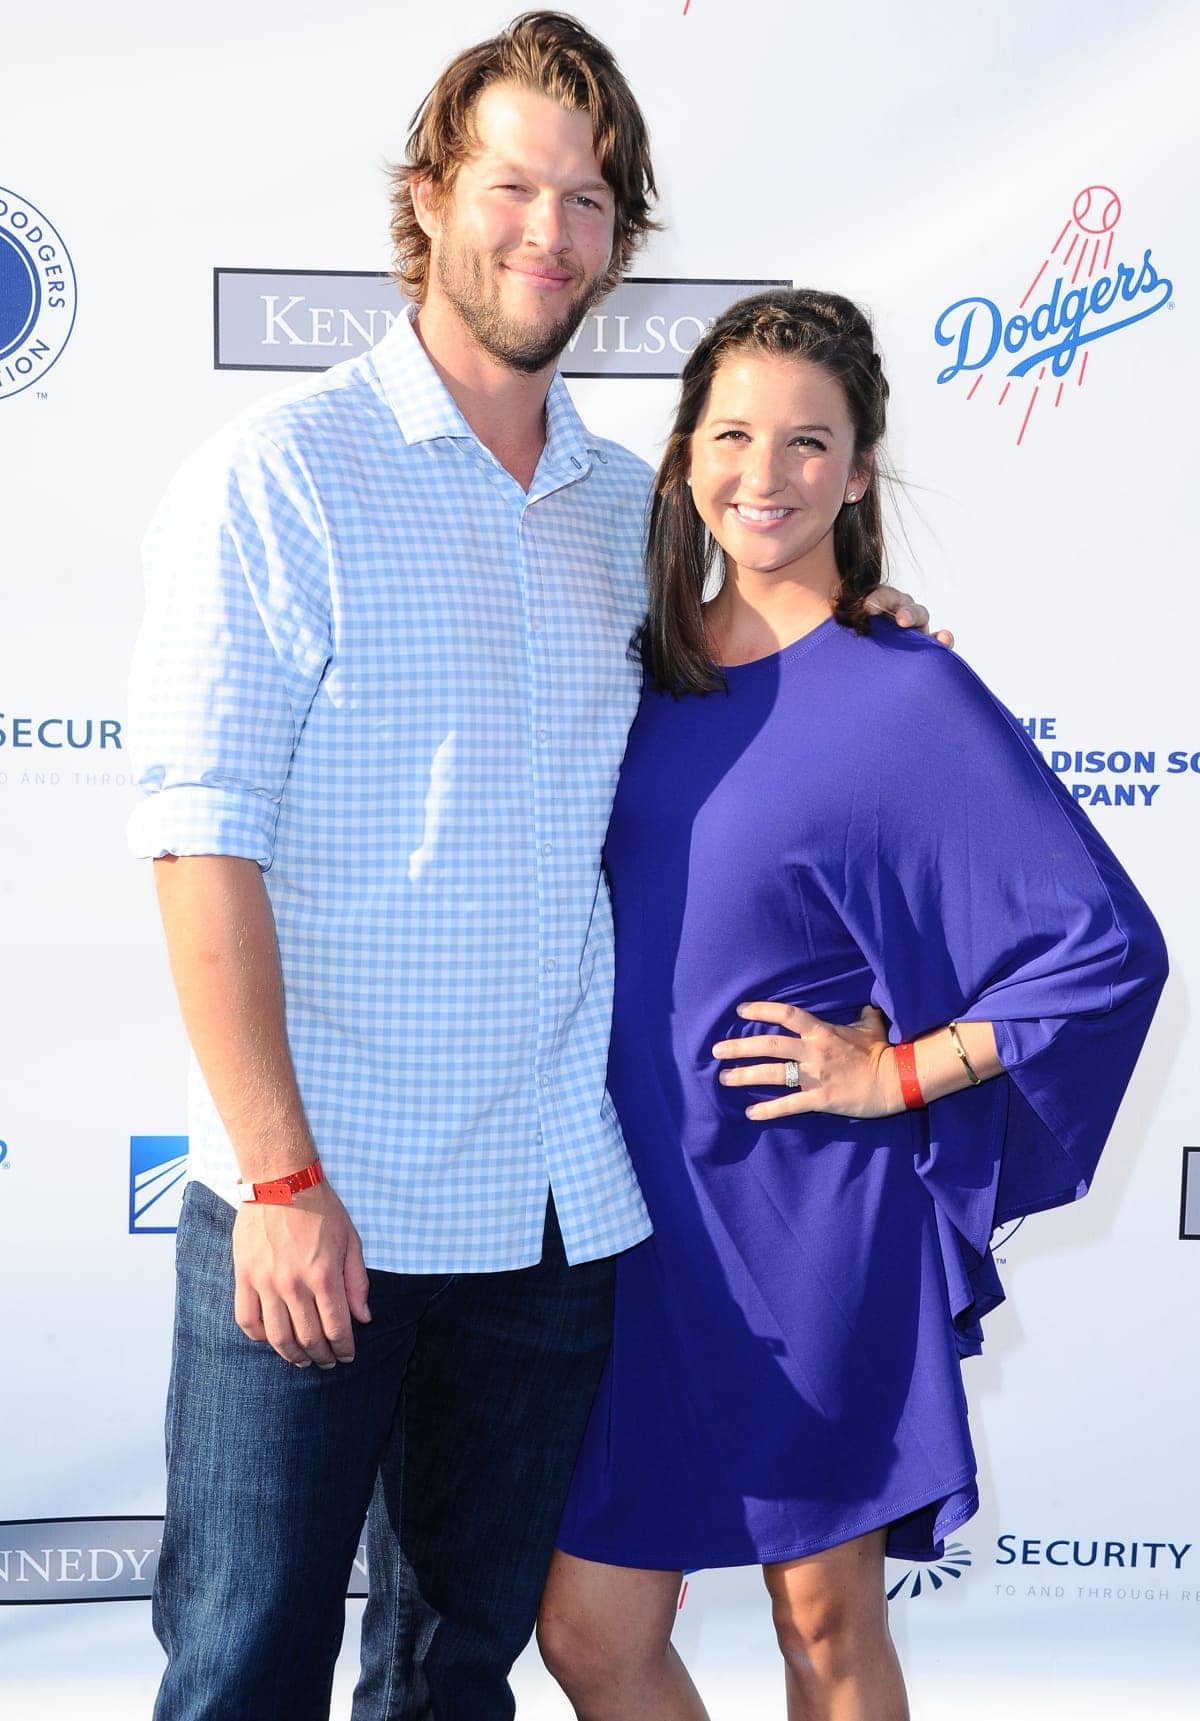 Clayton Kershaw and wife Ellen Kershaw share a strong Methodist Christian faith